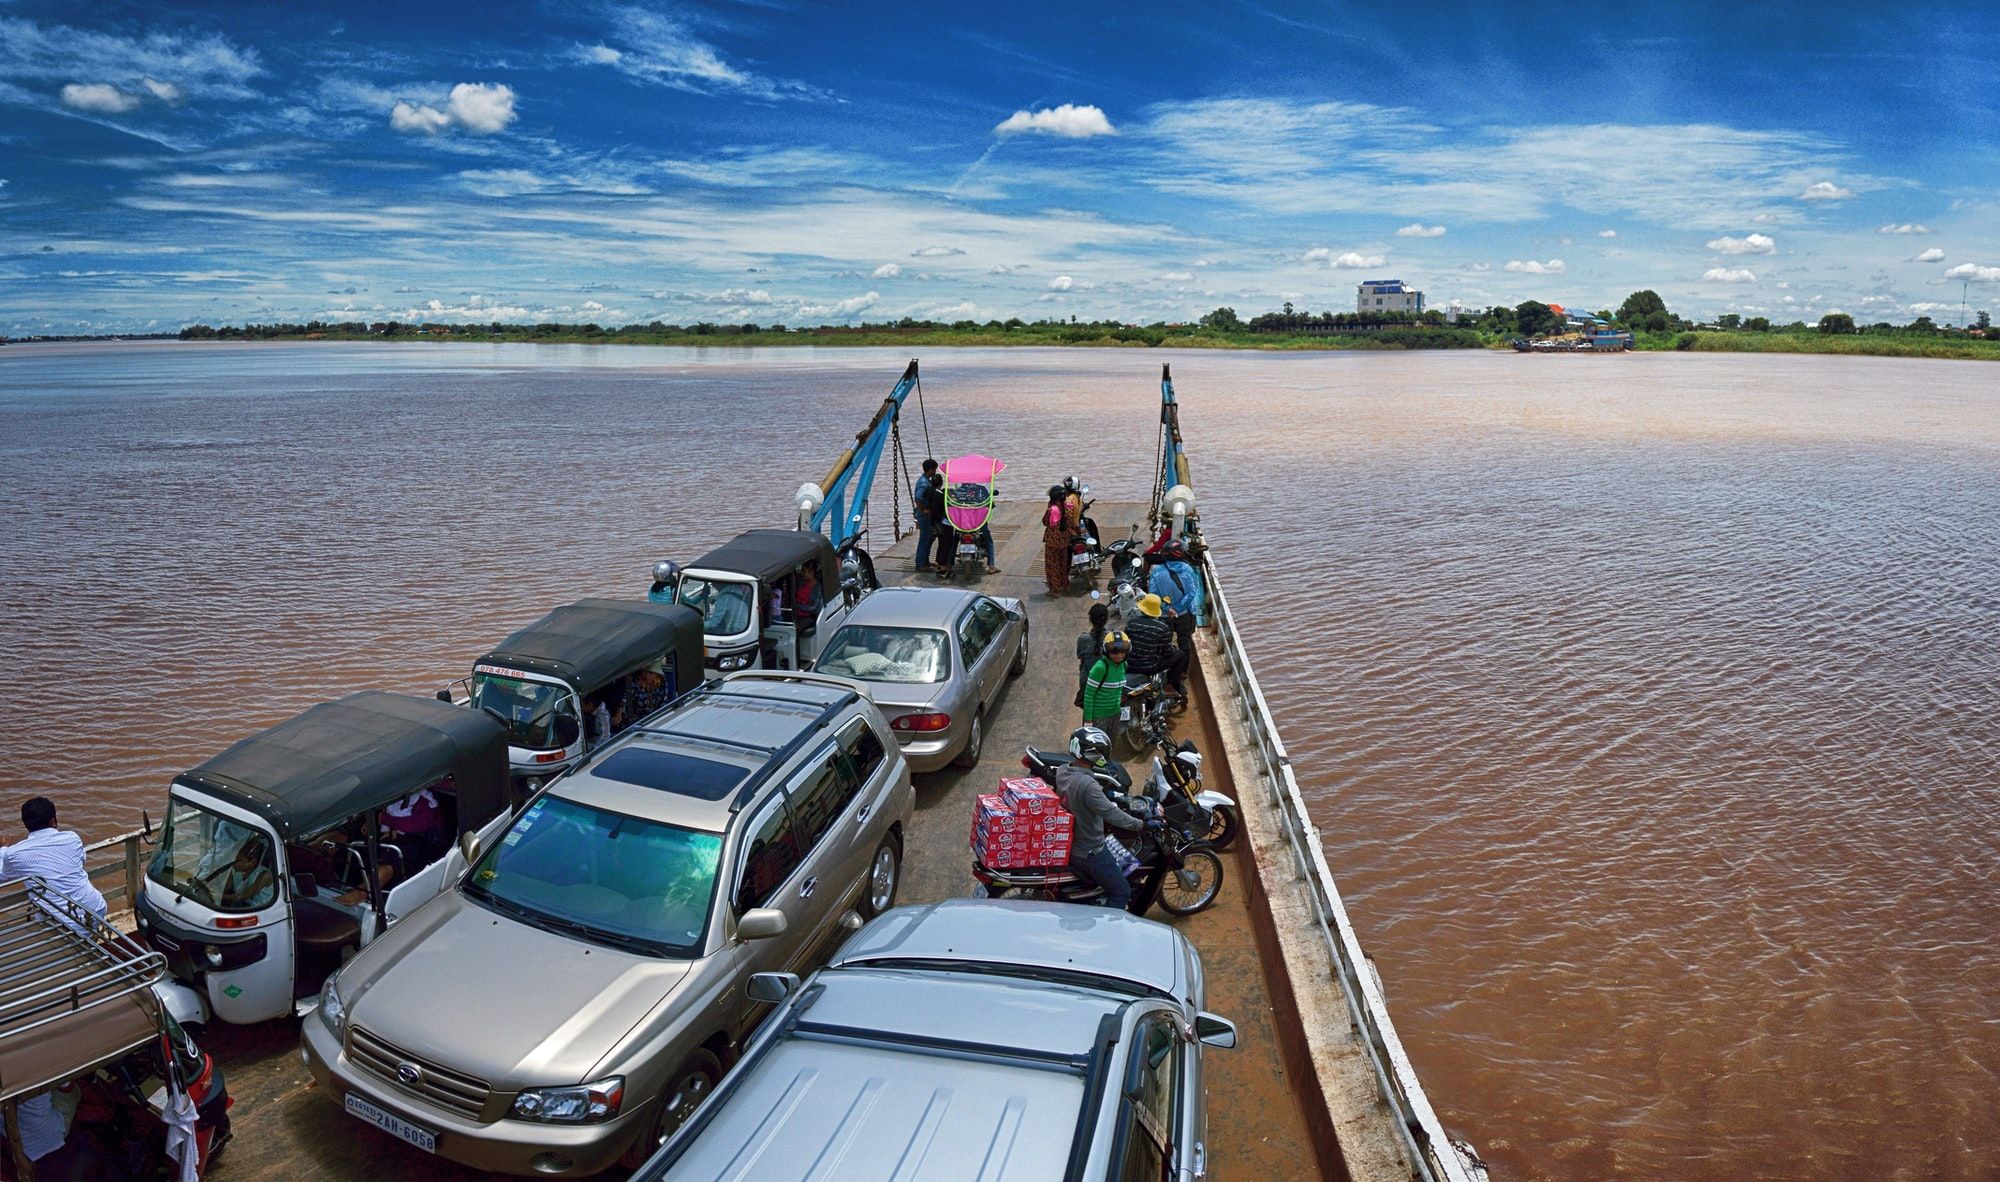 Cars, bikes and tuk tuks on the back of a passenger ferry